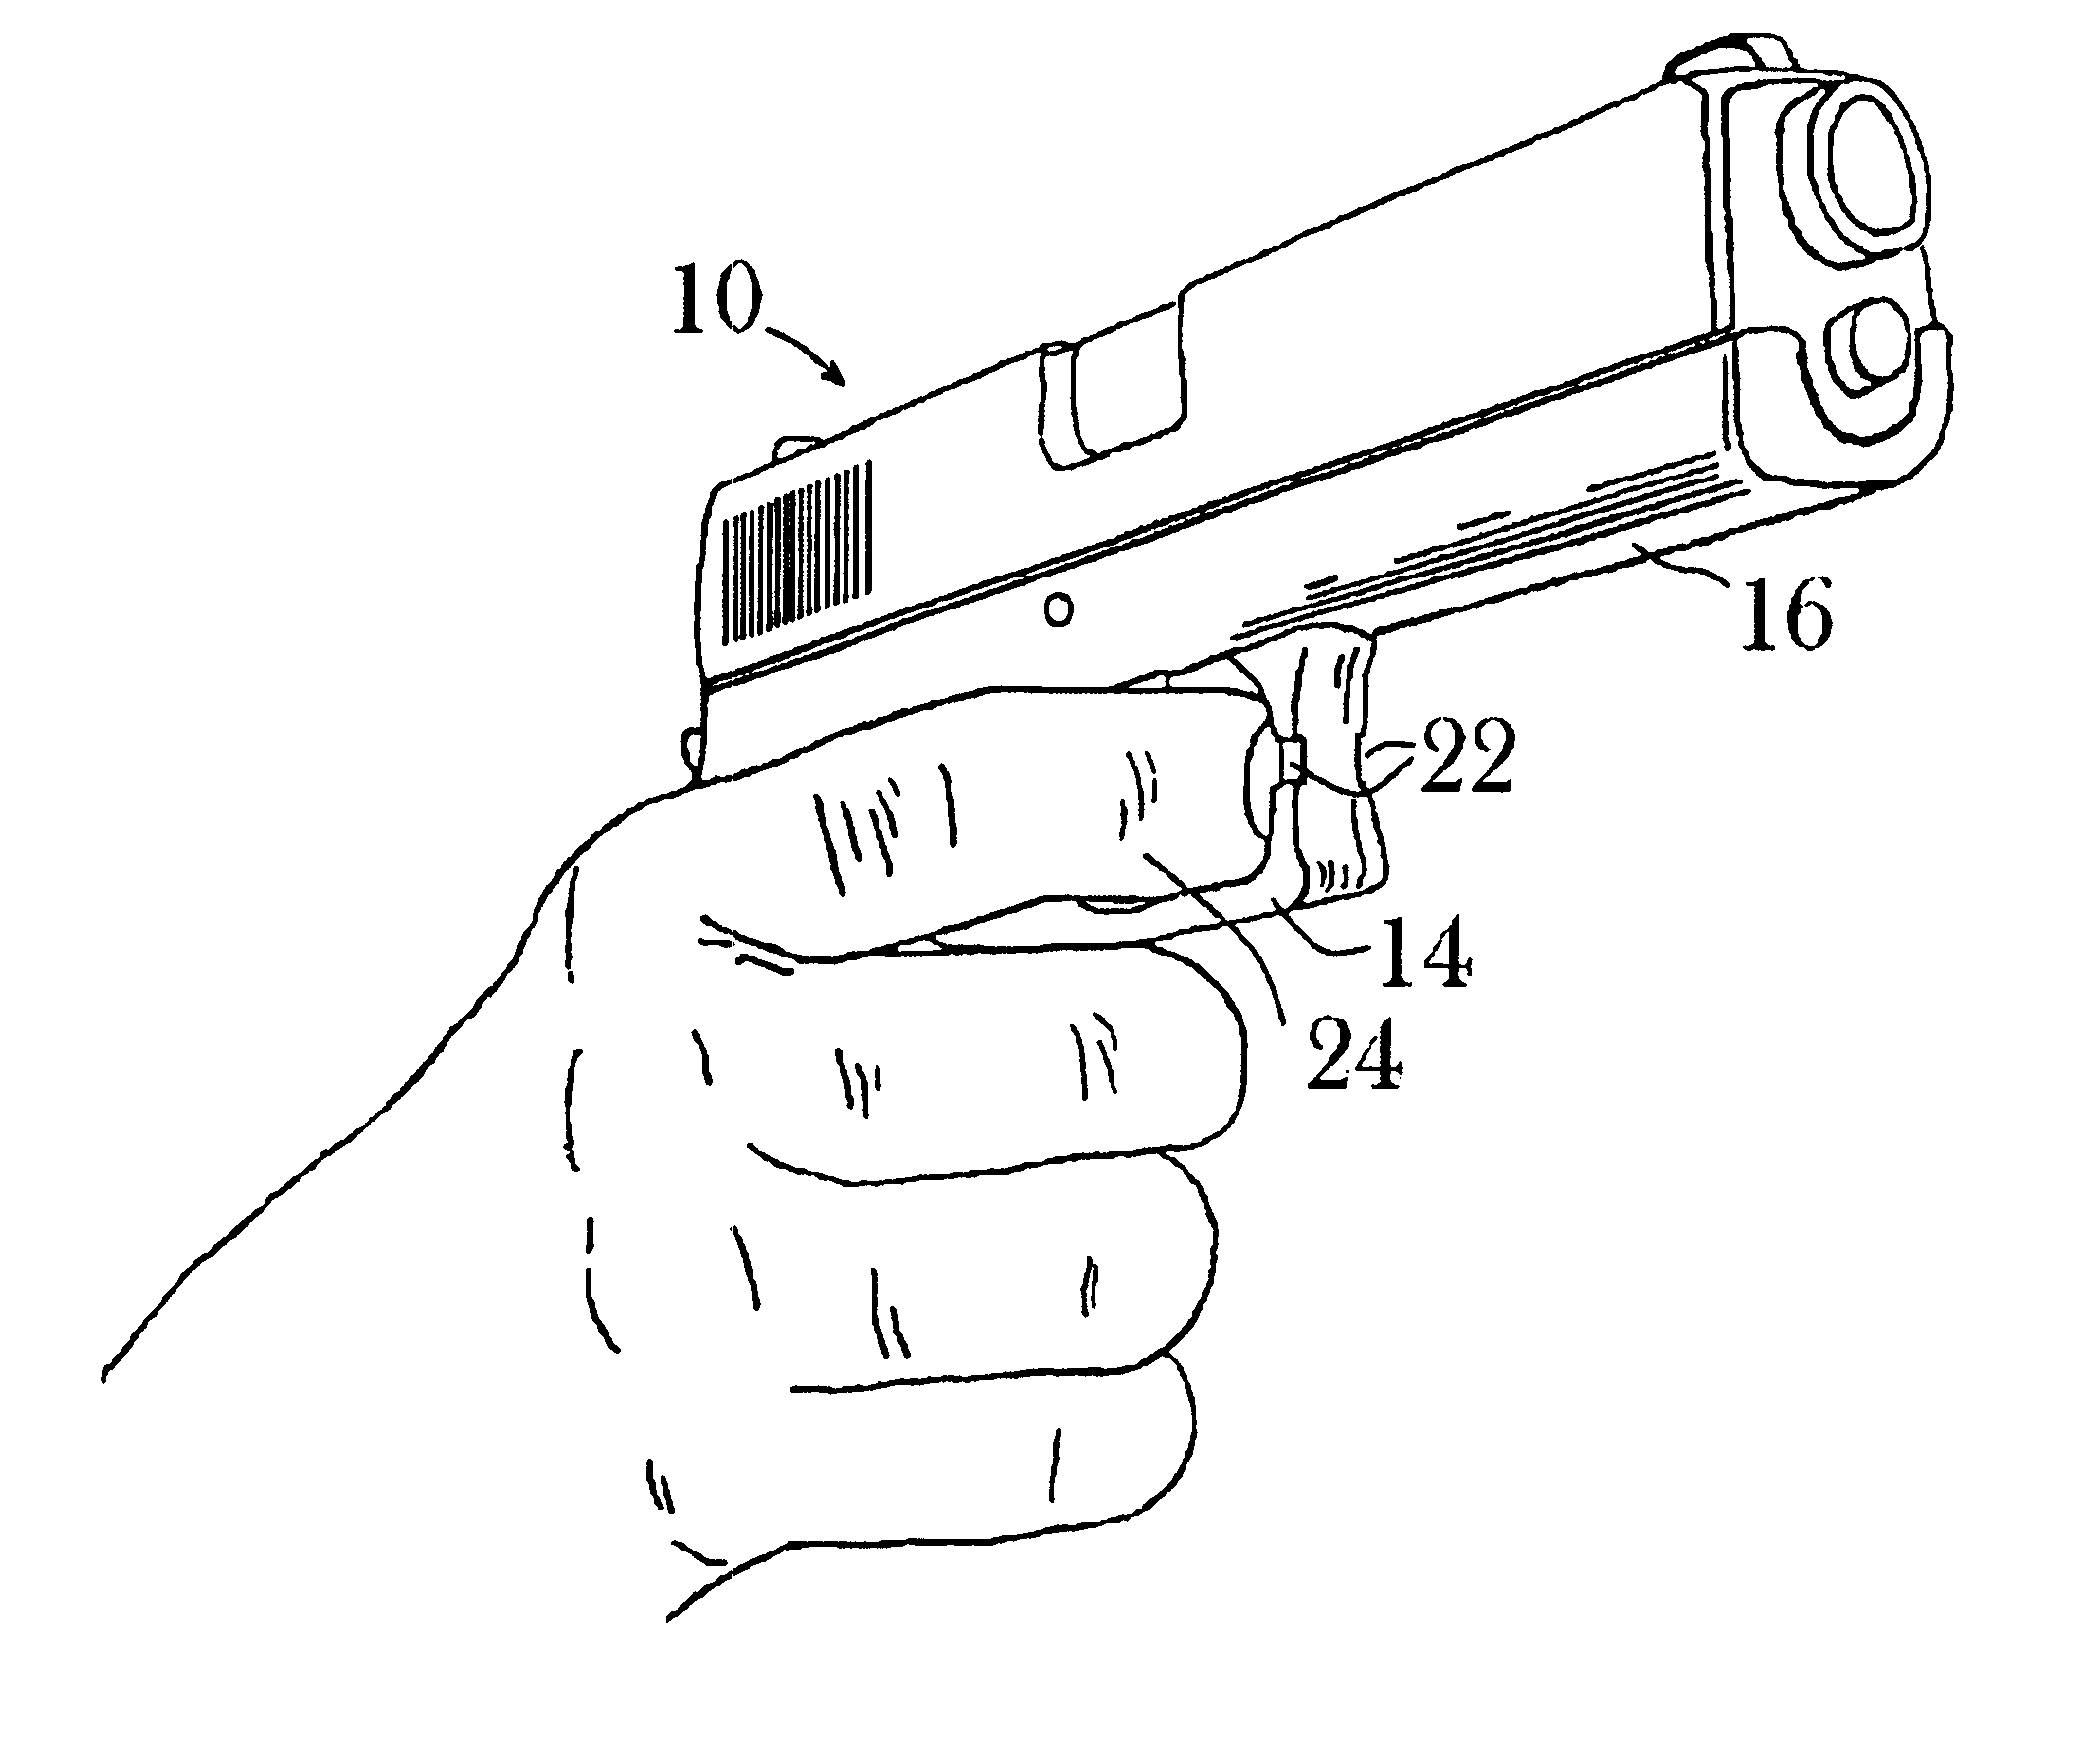 Tactile trigger finger safety cue for firearm or other trigger-activated device